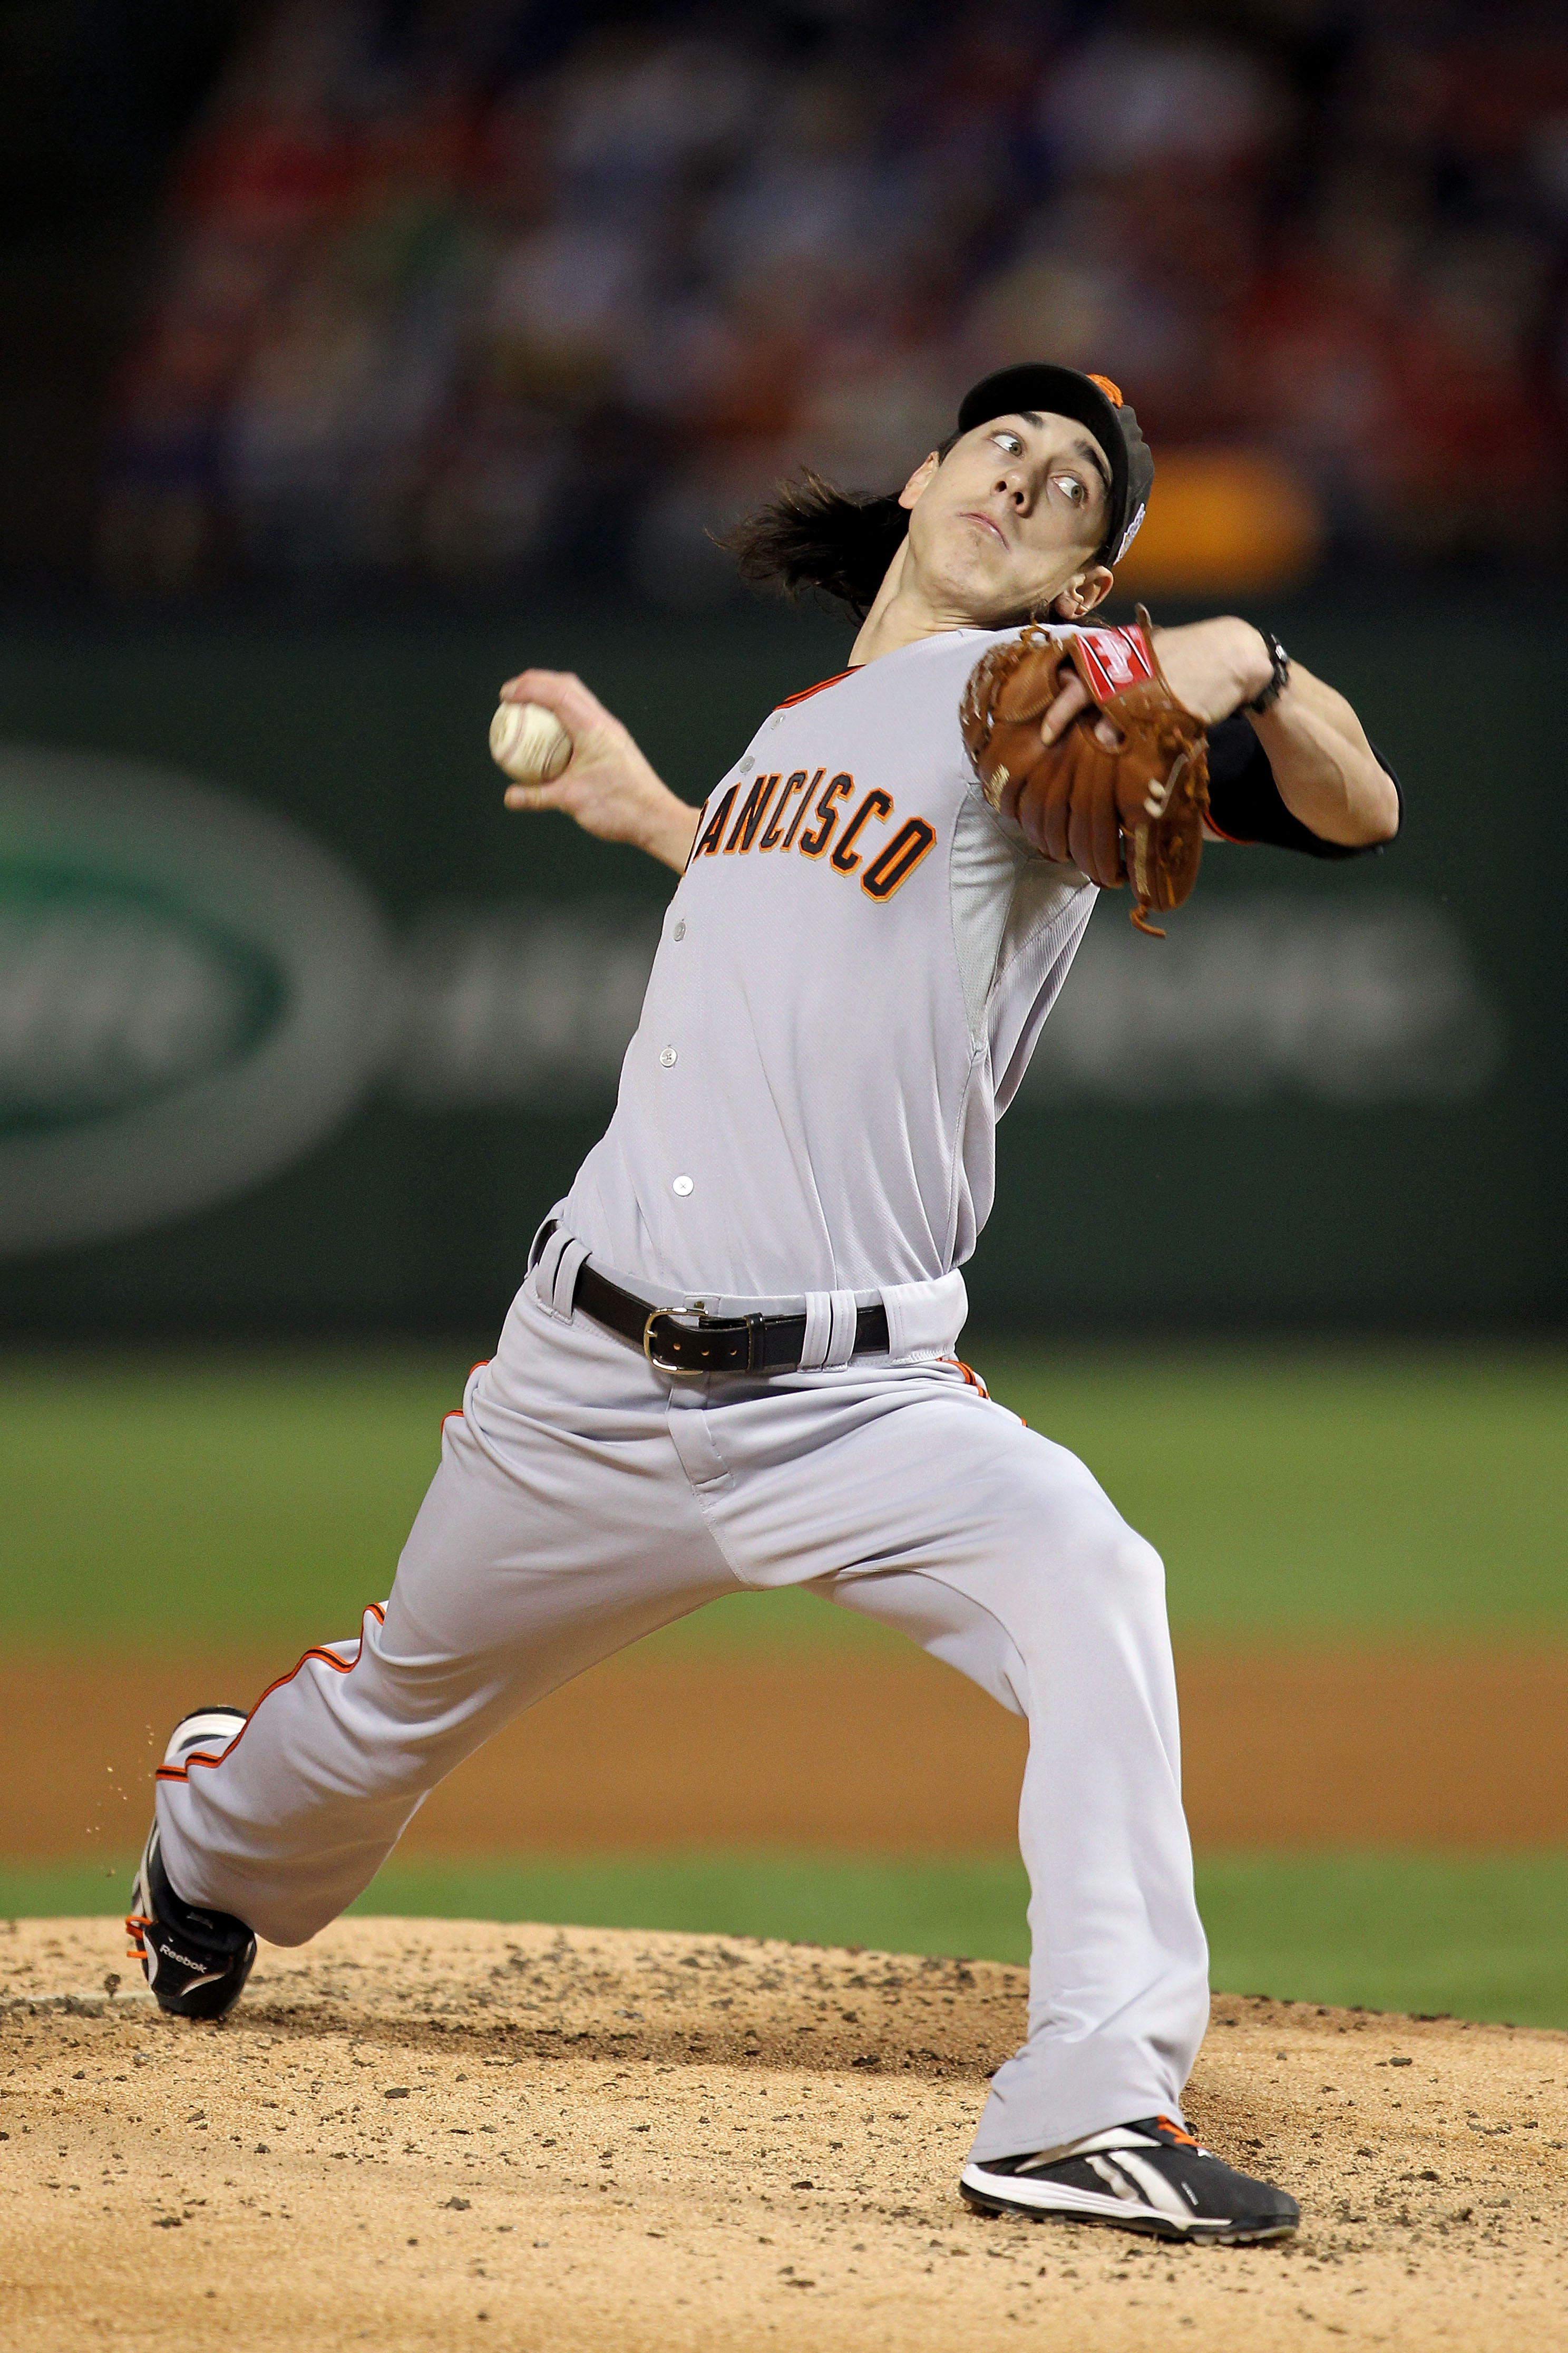 MLB Notes: Tim Lincecum signs $2.5 million, 1-year deal with